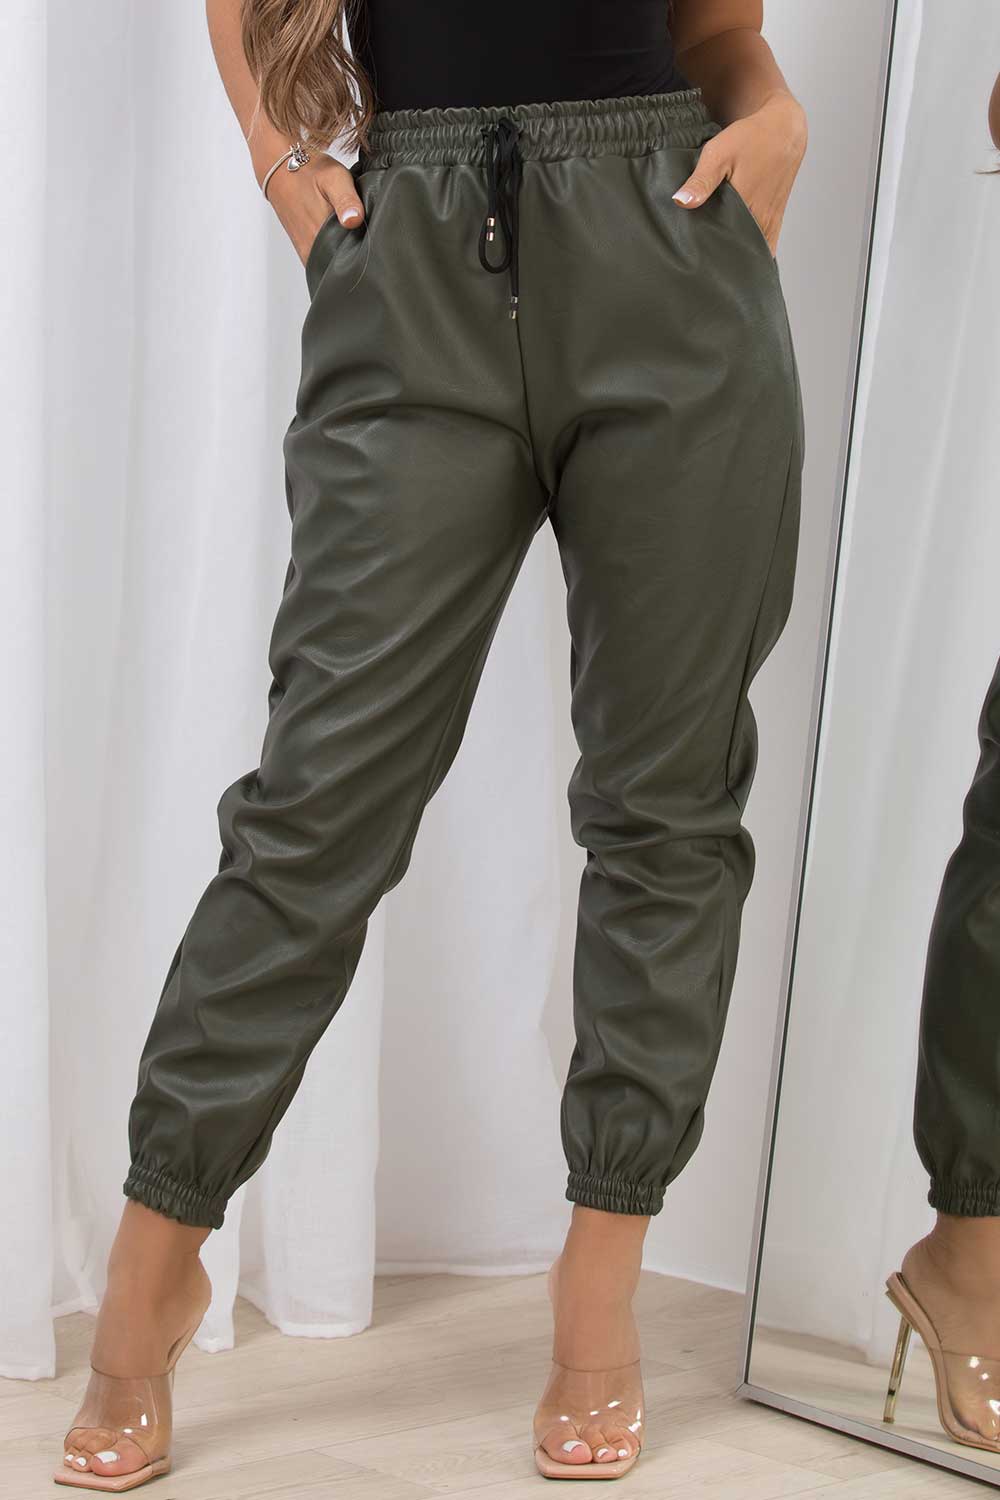 womens faux leather leather look trousers with drawstring waist sale uk